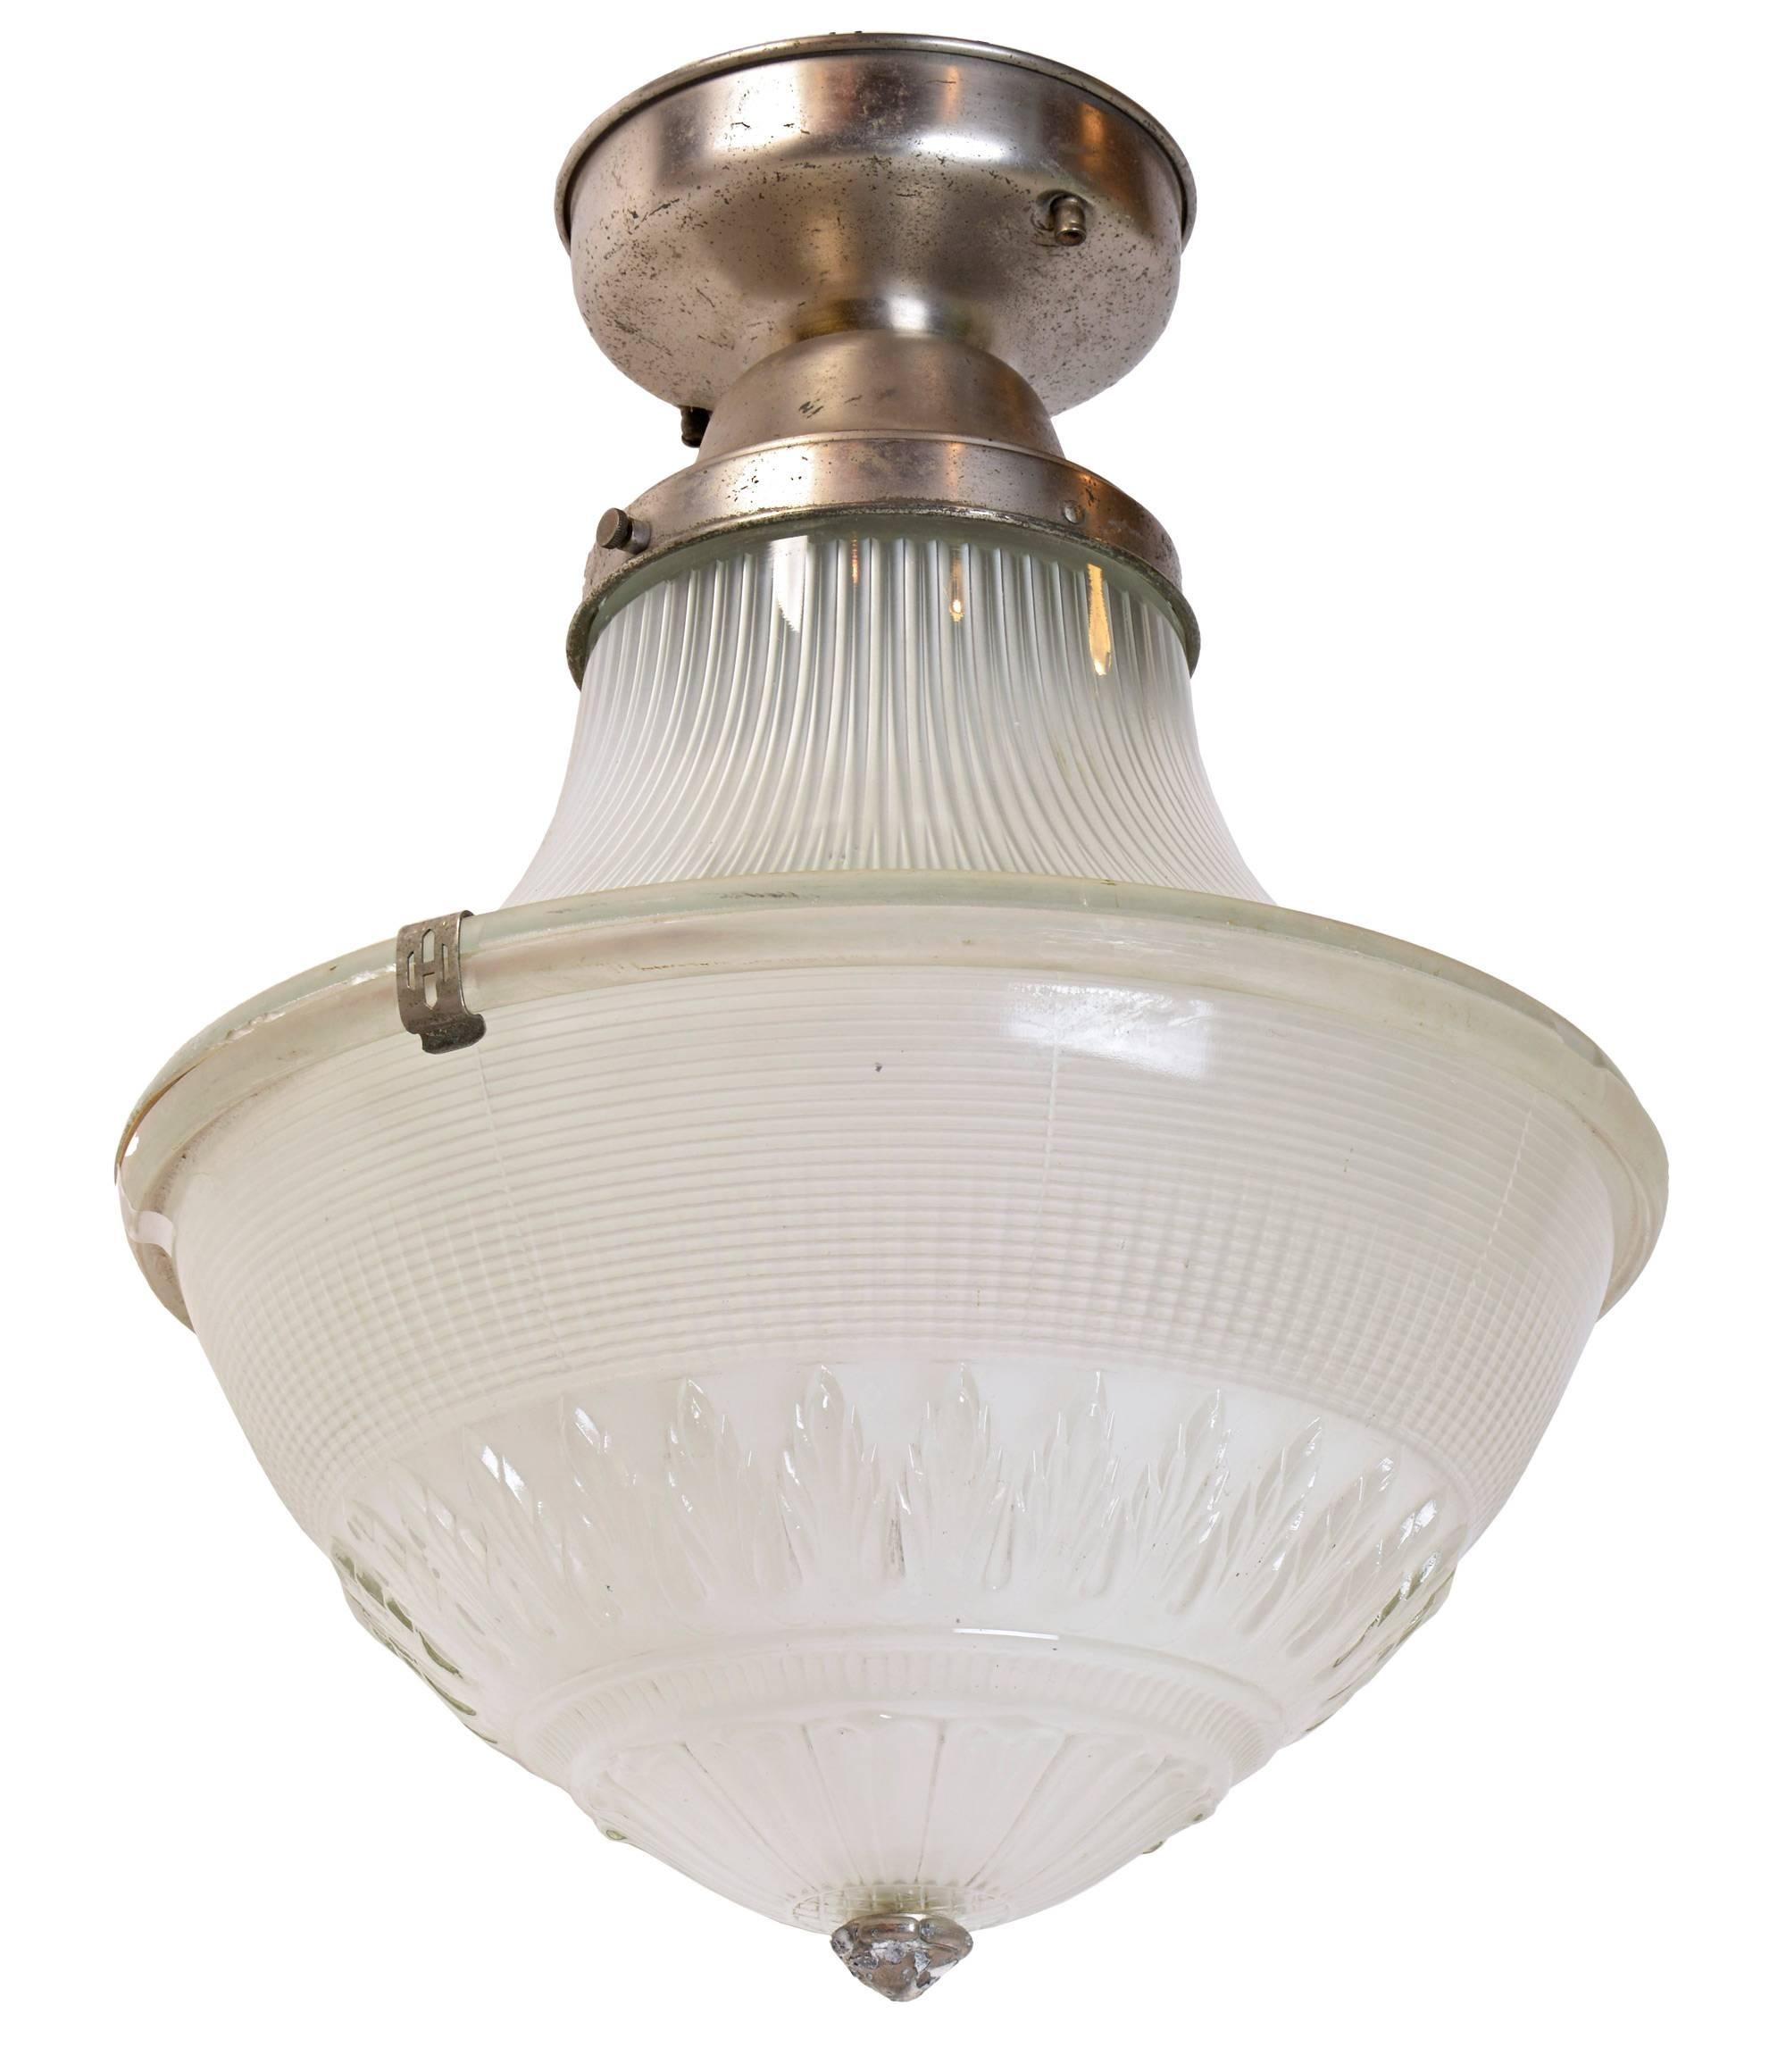 With its beautiful patterning, this 1923 holophane flush mount brings a sense of airiness and historic character to any room. A nickel-plated fitter holds the fixture's unique three-piece globe, comprised of a ribbed upper shade, a decorative lower